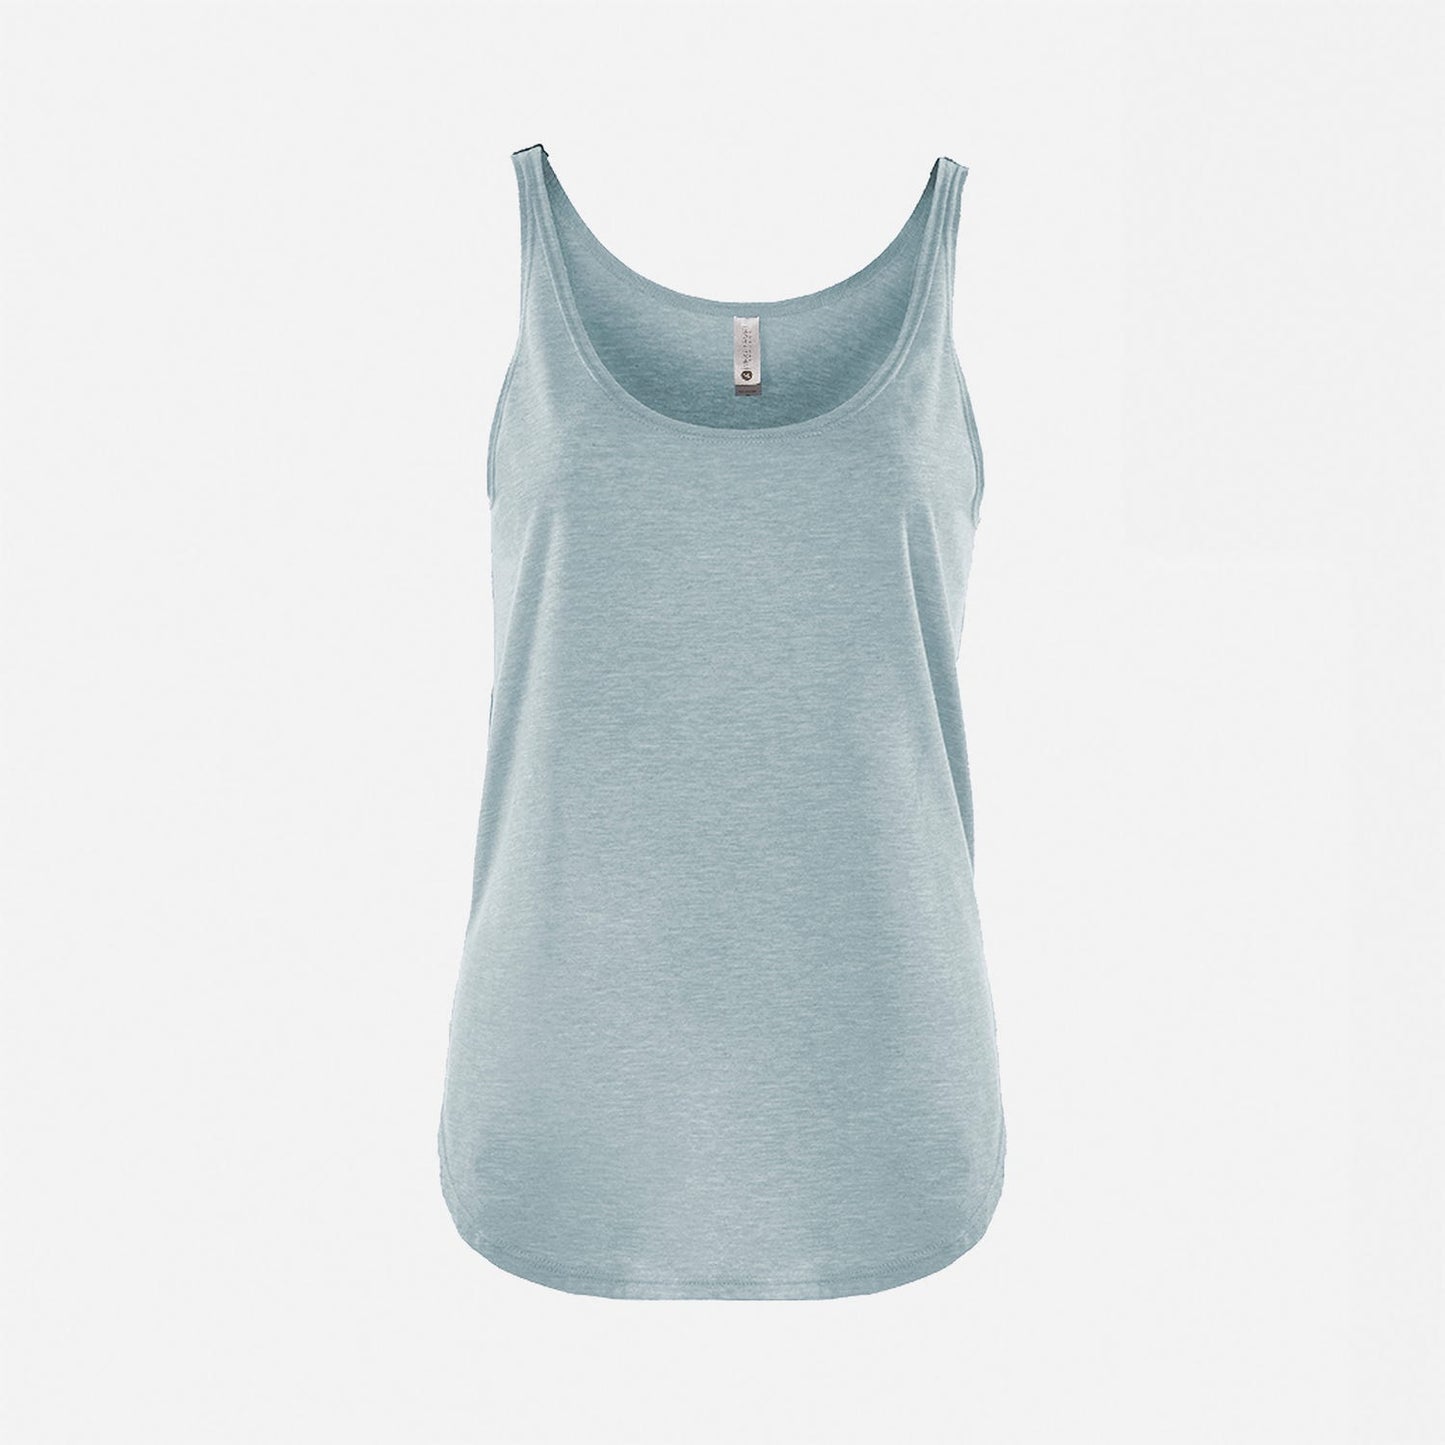 Next Level, Scoop Tank, In multiple colors